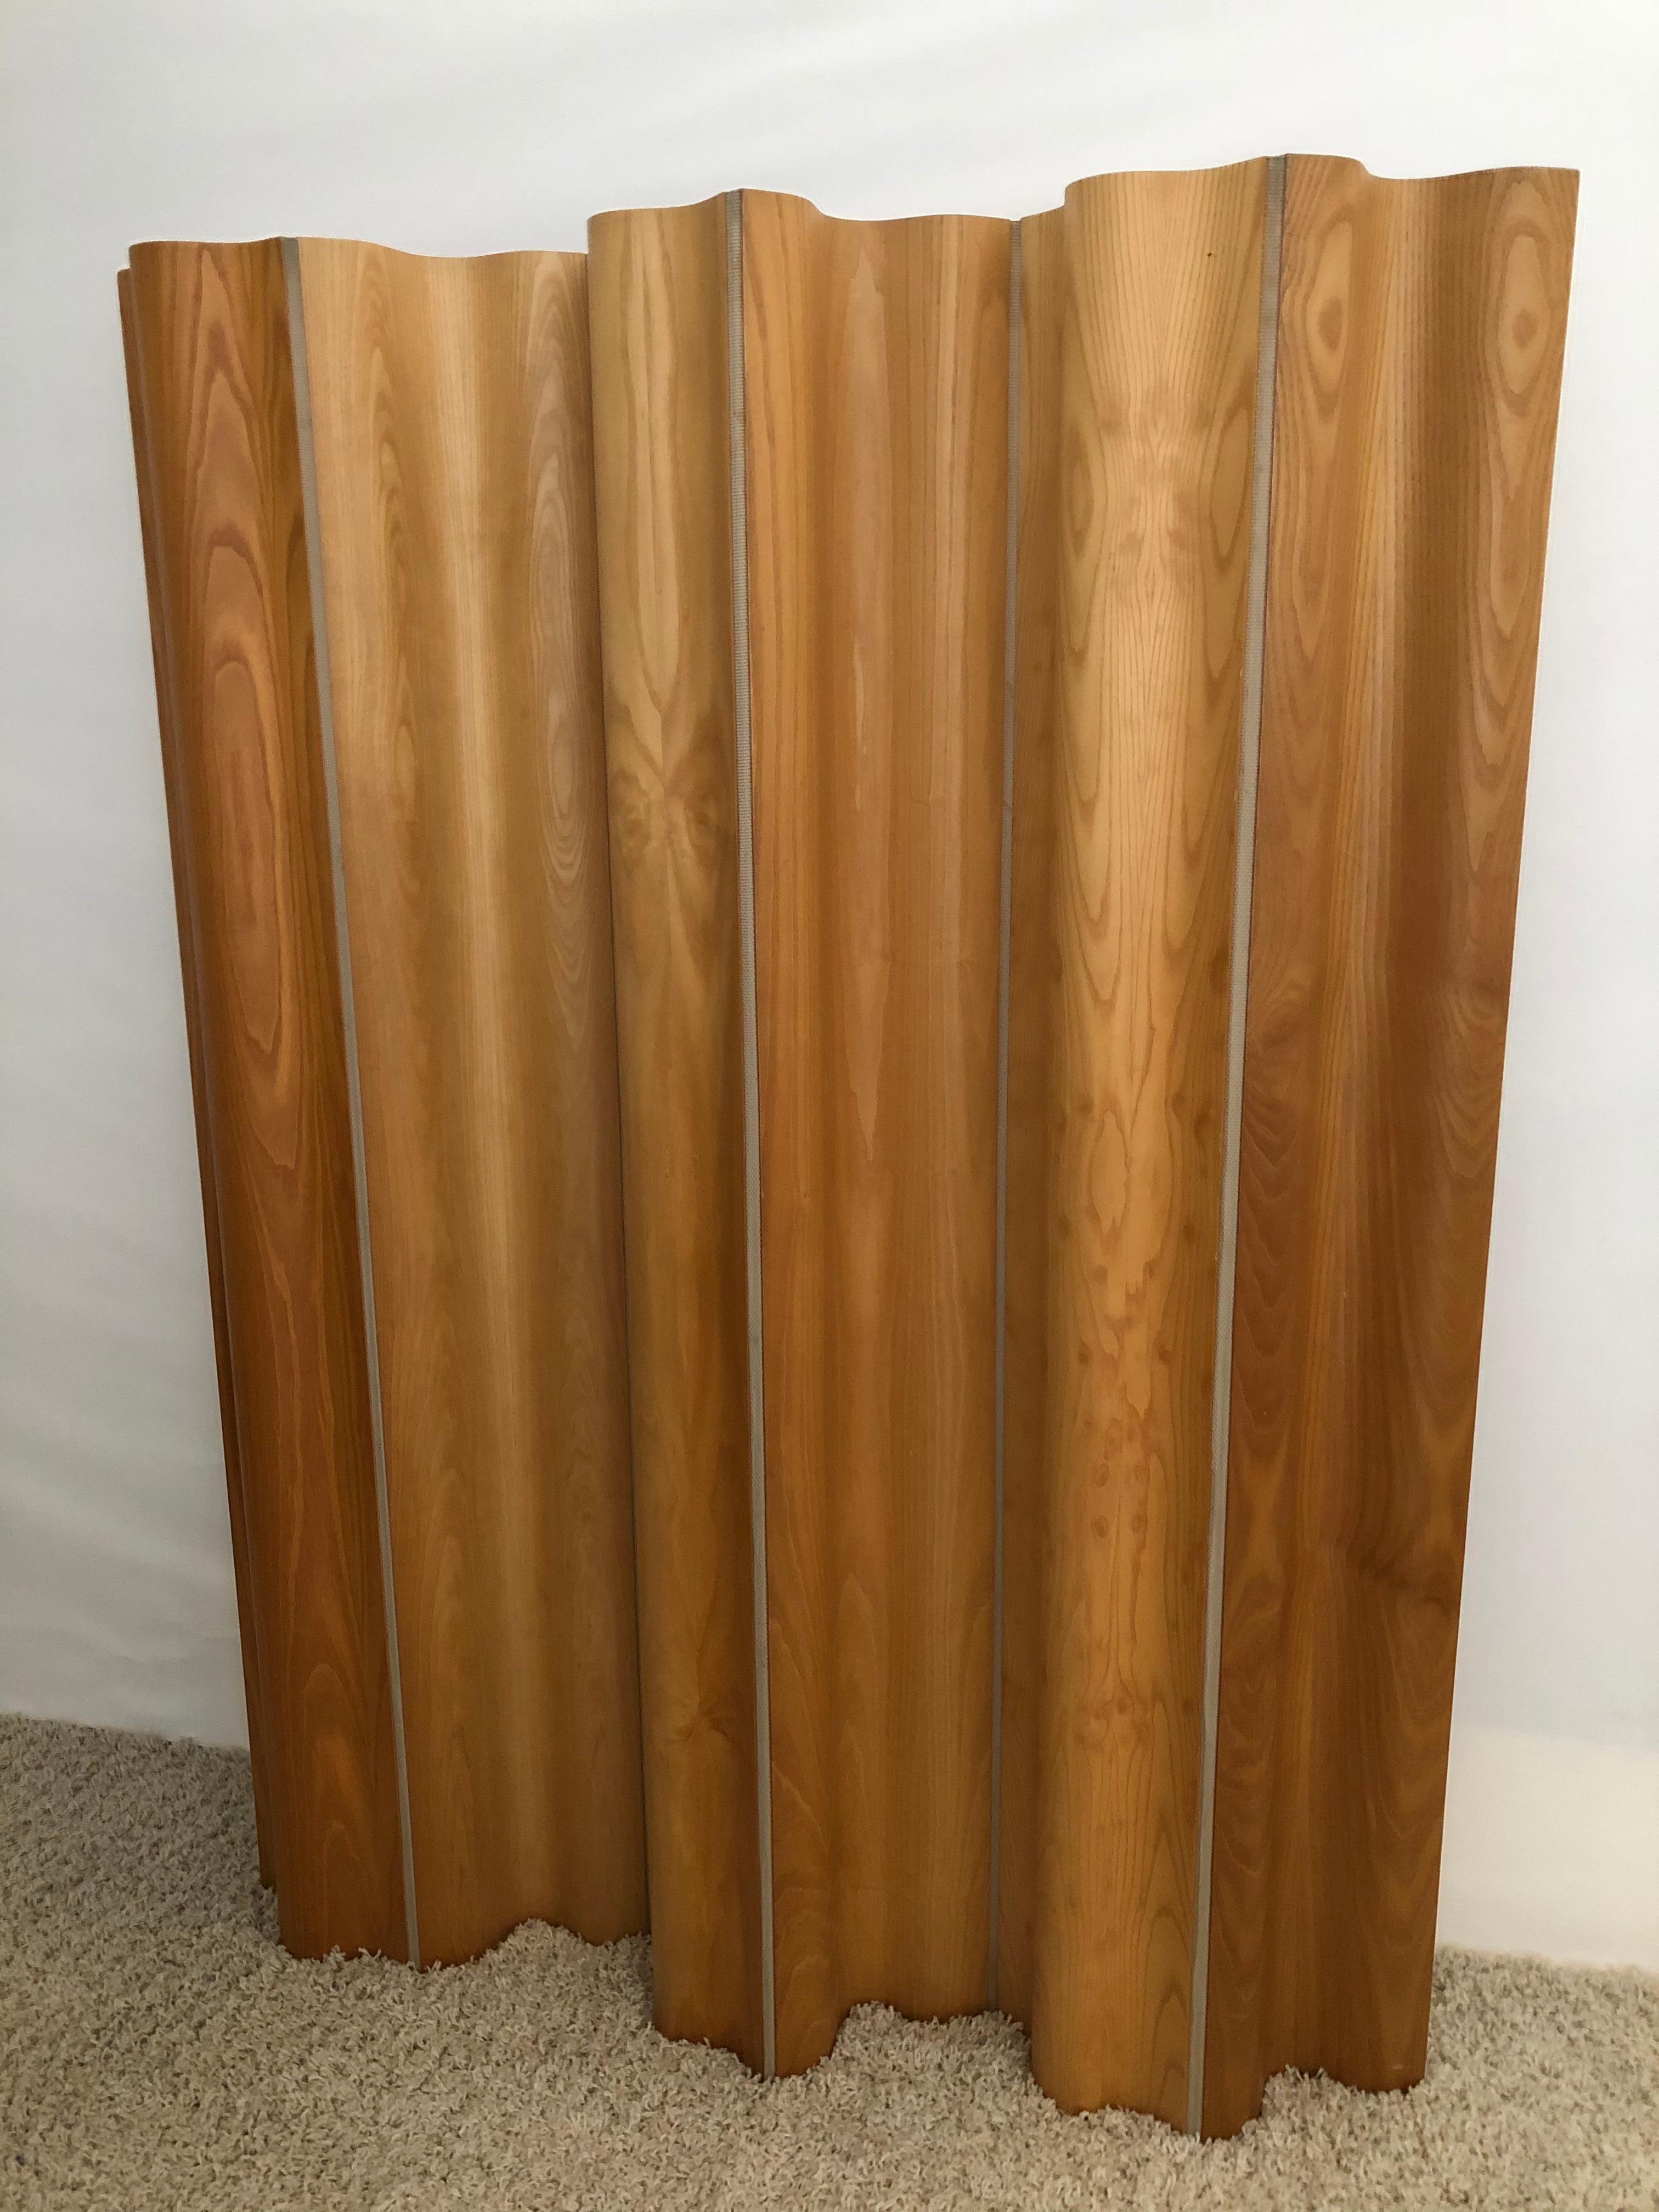 Mid-Century Modern Charles and Ray Eames Ash/Birch Molded Plywood Folding Room Divider Screen